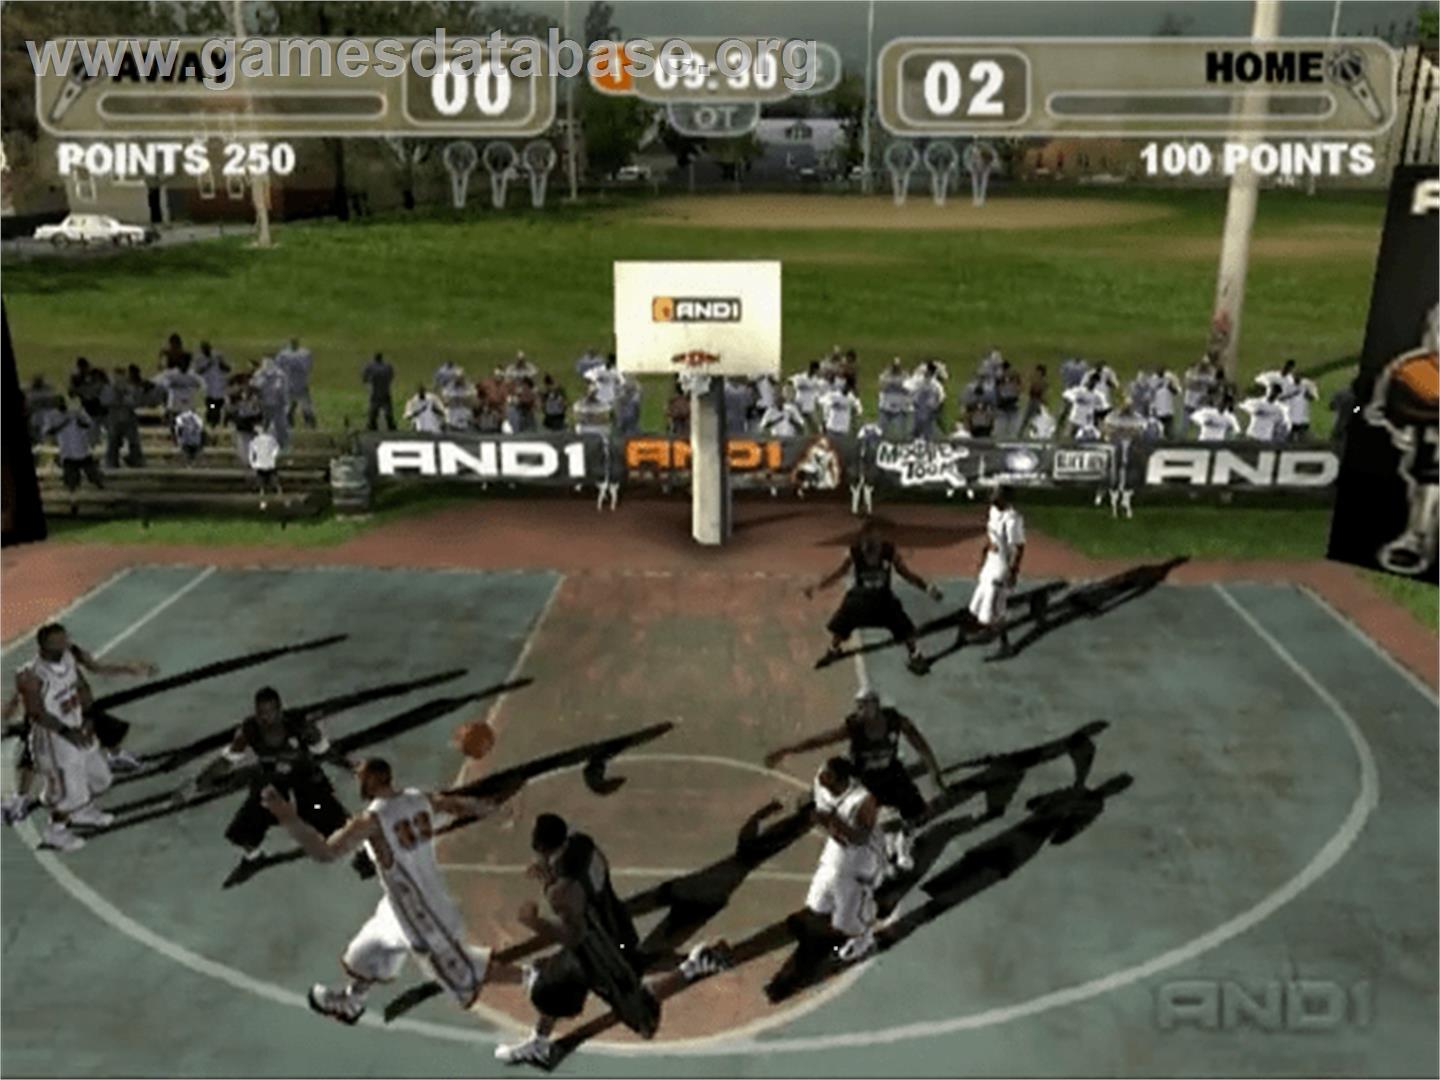 AND 1 Streetball - Sony Playstation 2 - Artwork - In Game